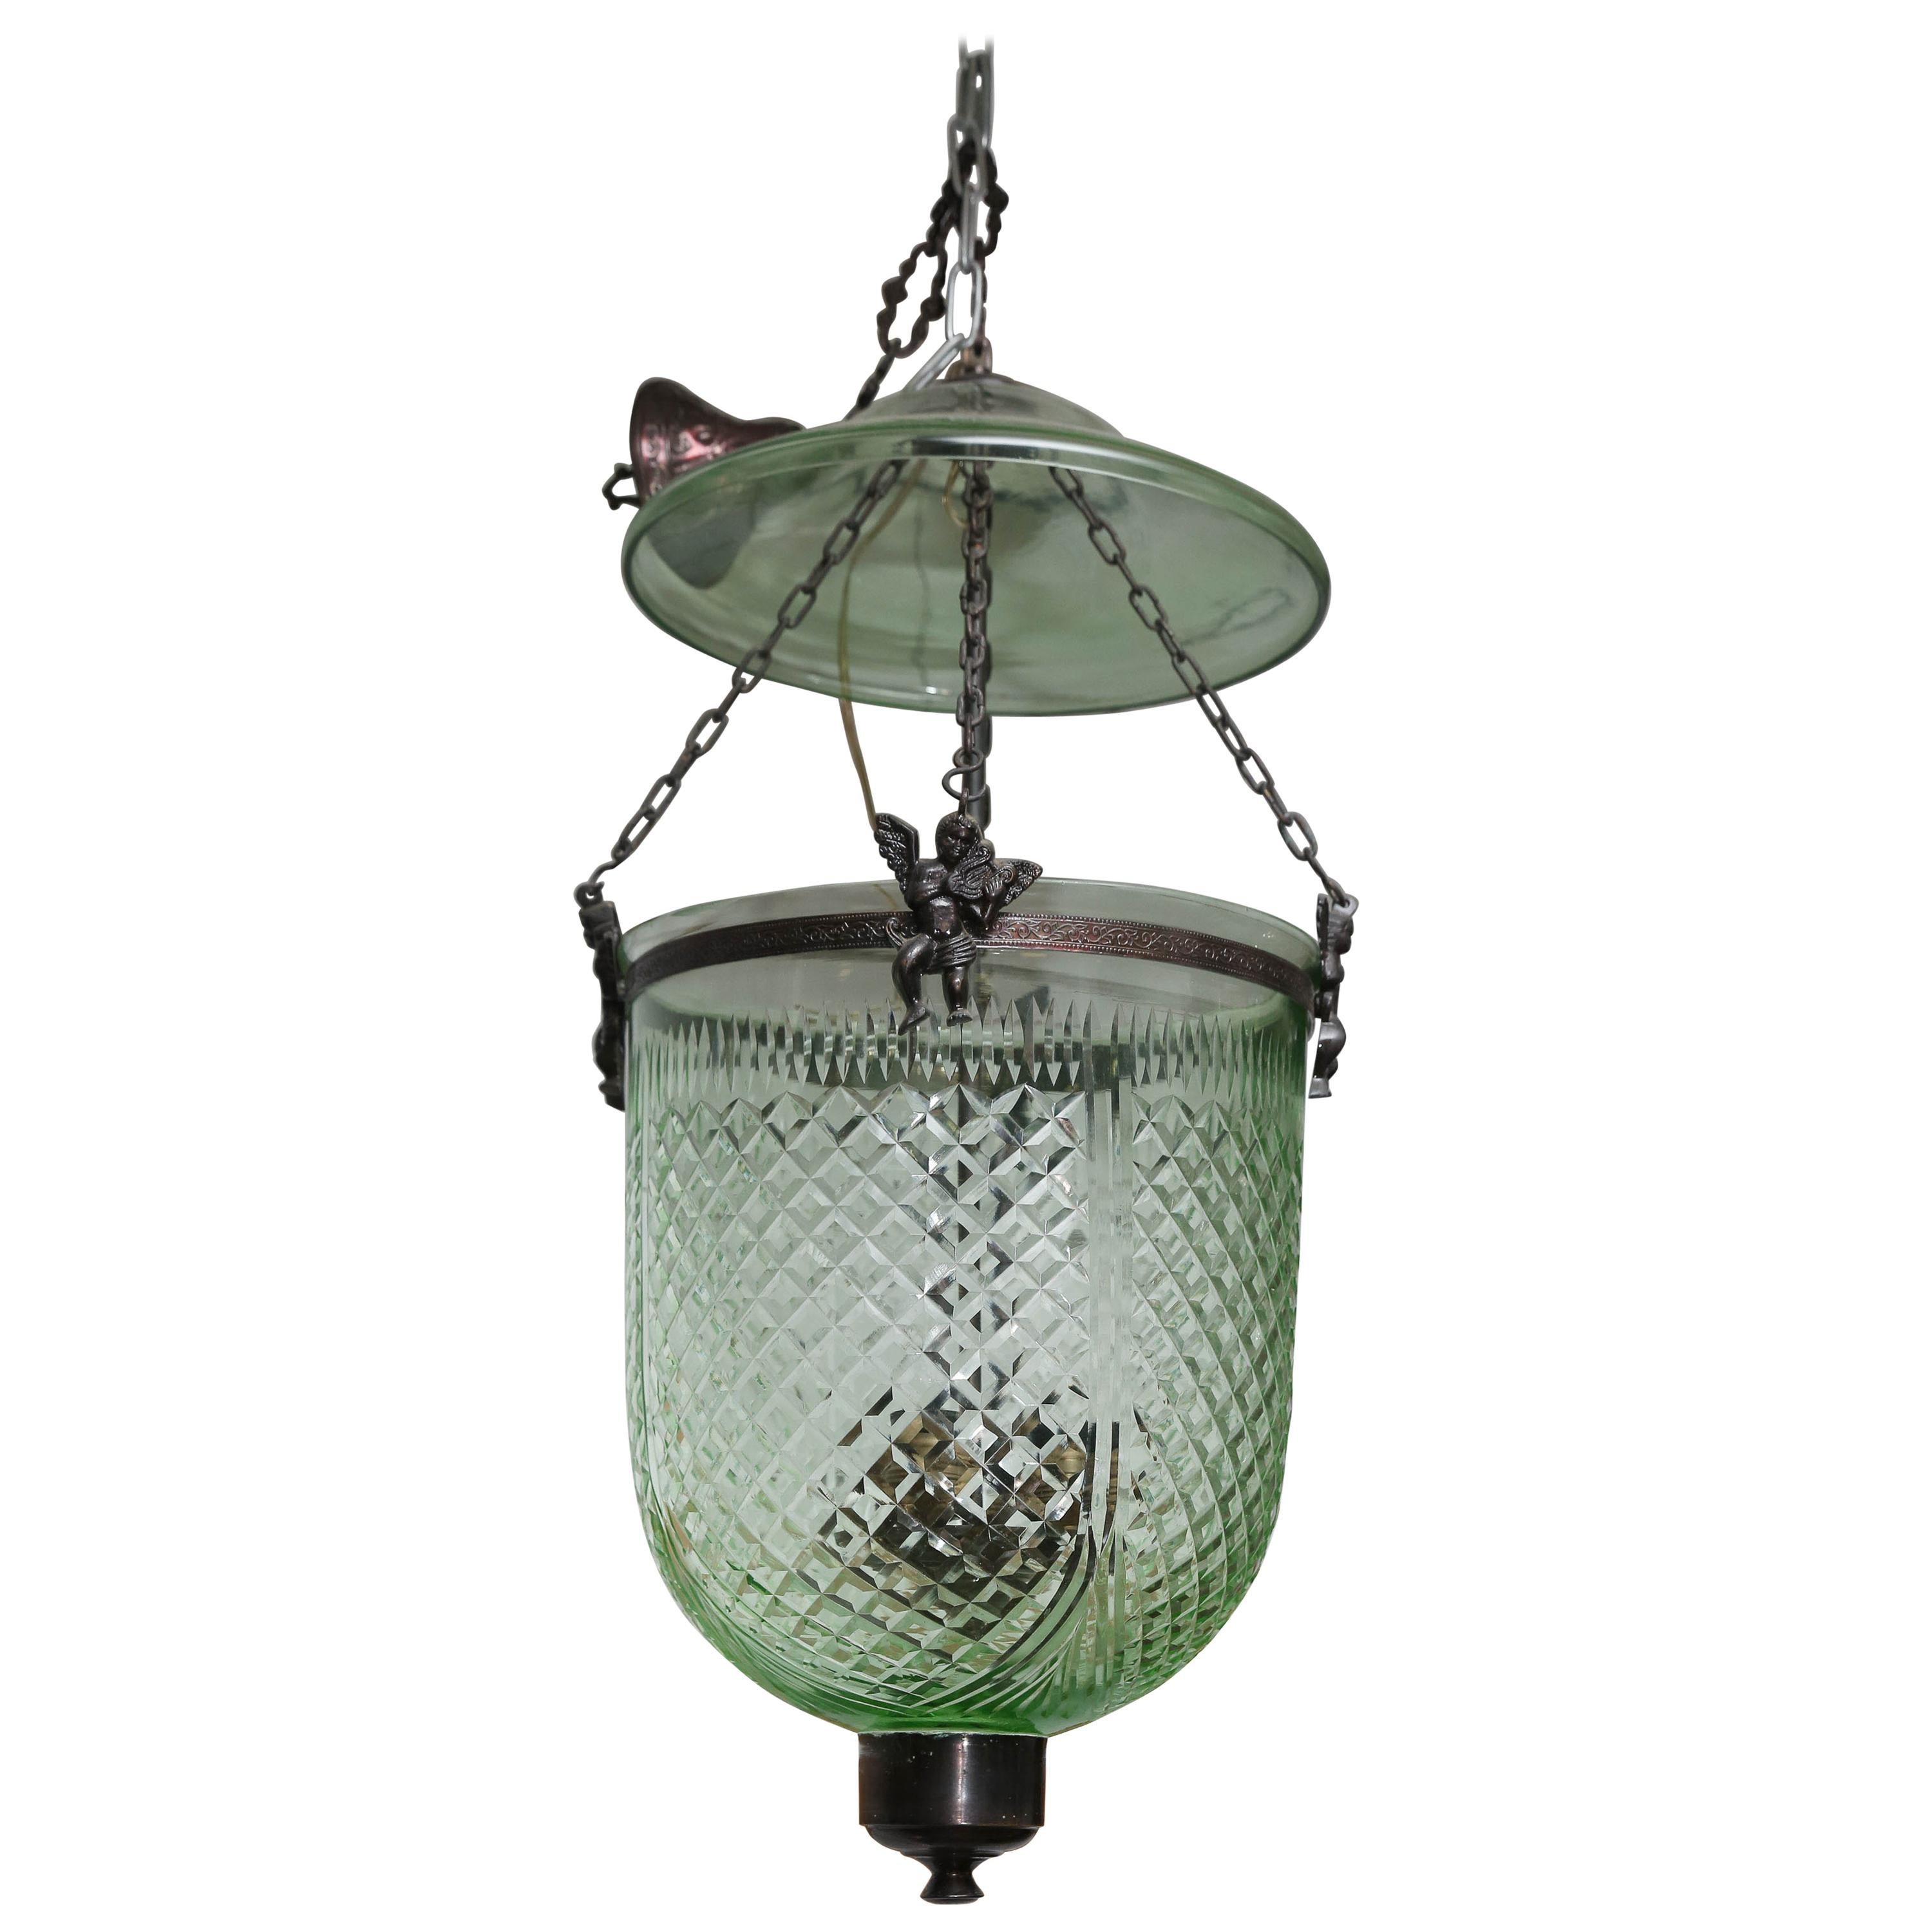 Vintage Hand-Cut Green Colored Bell Jar Lantern with Smoke Screen